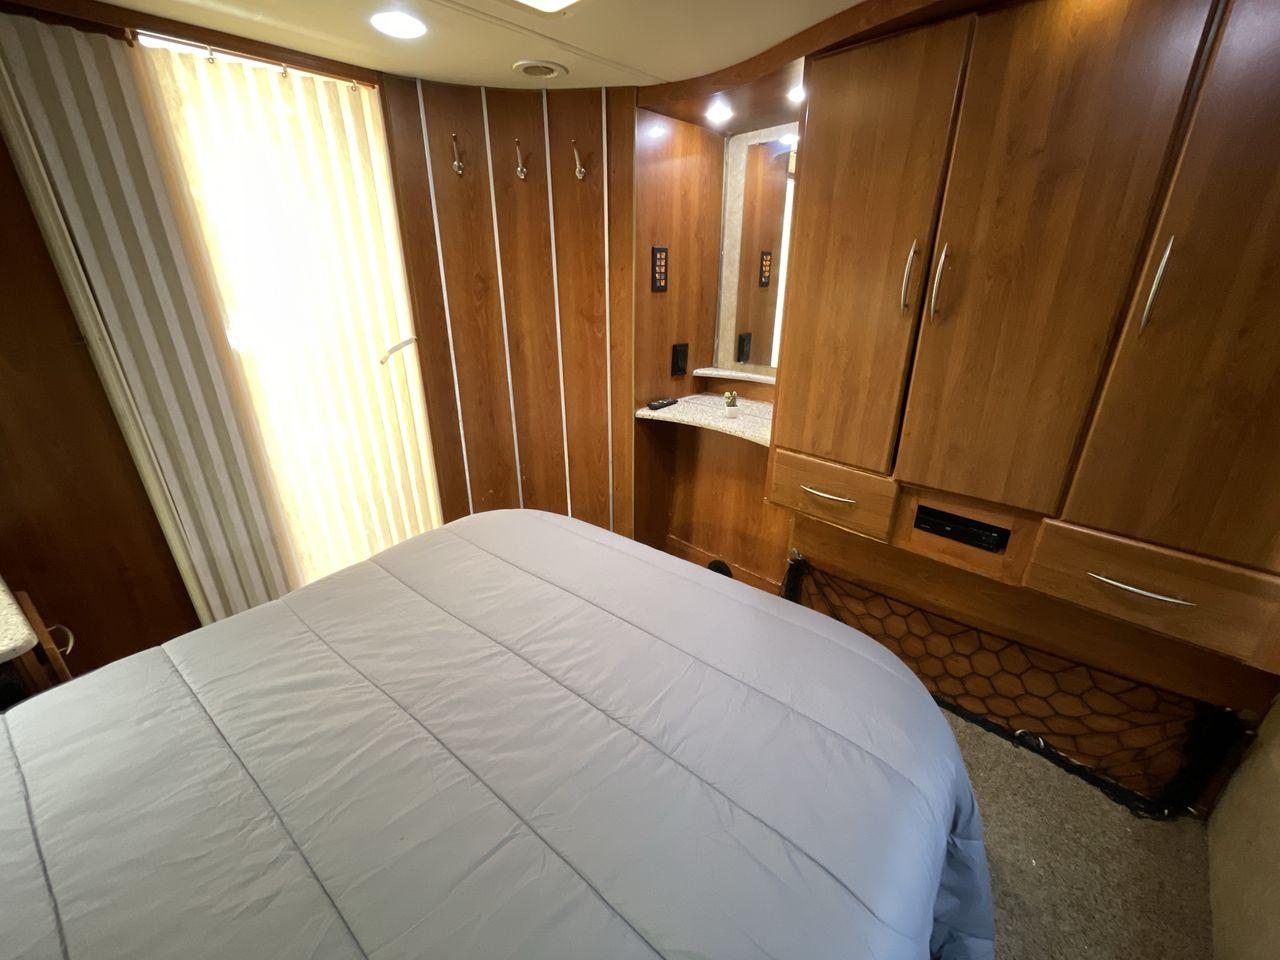 2008 TAN COACHMEN LEPRECHAUN 320DS E-450 (1FDXE45S08D) with an 6.8L V10 SOHC 20V engine, Length: 31.5 ft. | Dry Weight: 12,555 lbs. | Gross Weight: 14,500 lbs. | Slides: 2 transmission, located at 4319 N Main St, Cleburne, TX, 76033, (817) 678-5133, 32.385960, -97.391212 - Here are some unique features and characteristics of the 2008 Coachmen Leprechaun 320DS that will make you want to buy this motorhome. (1) The 2008 Coachmen Leprechaun 320DS has two slide-outs, which expand the living space to create more room for relaxation and entertainment. With these additional - Photo #17